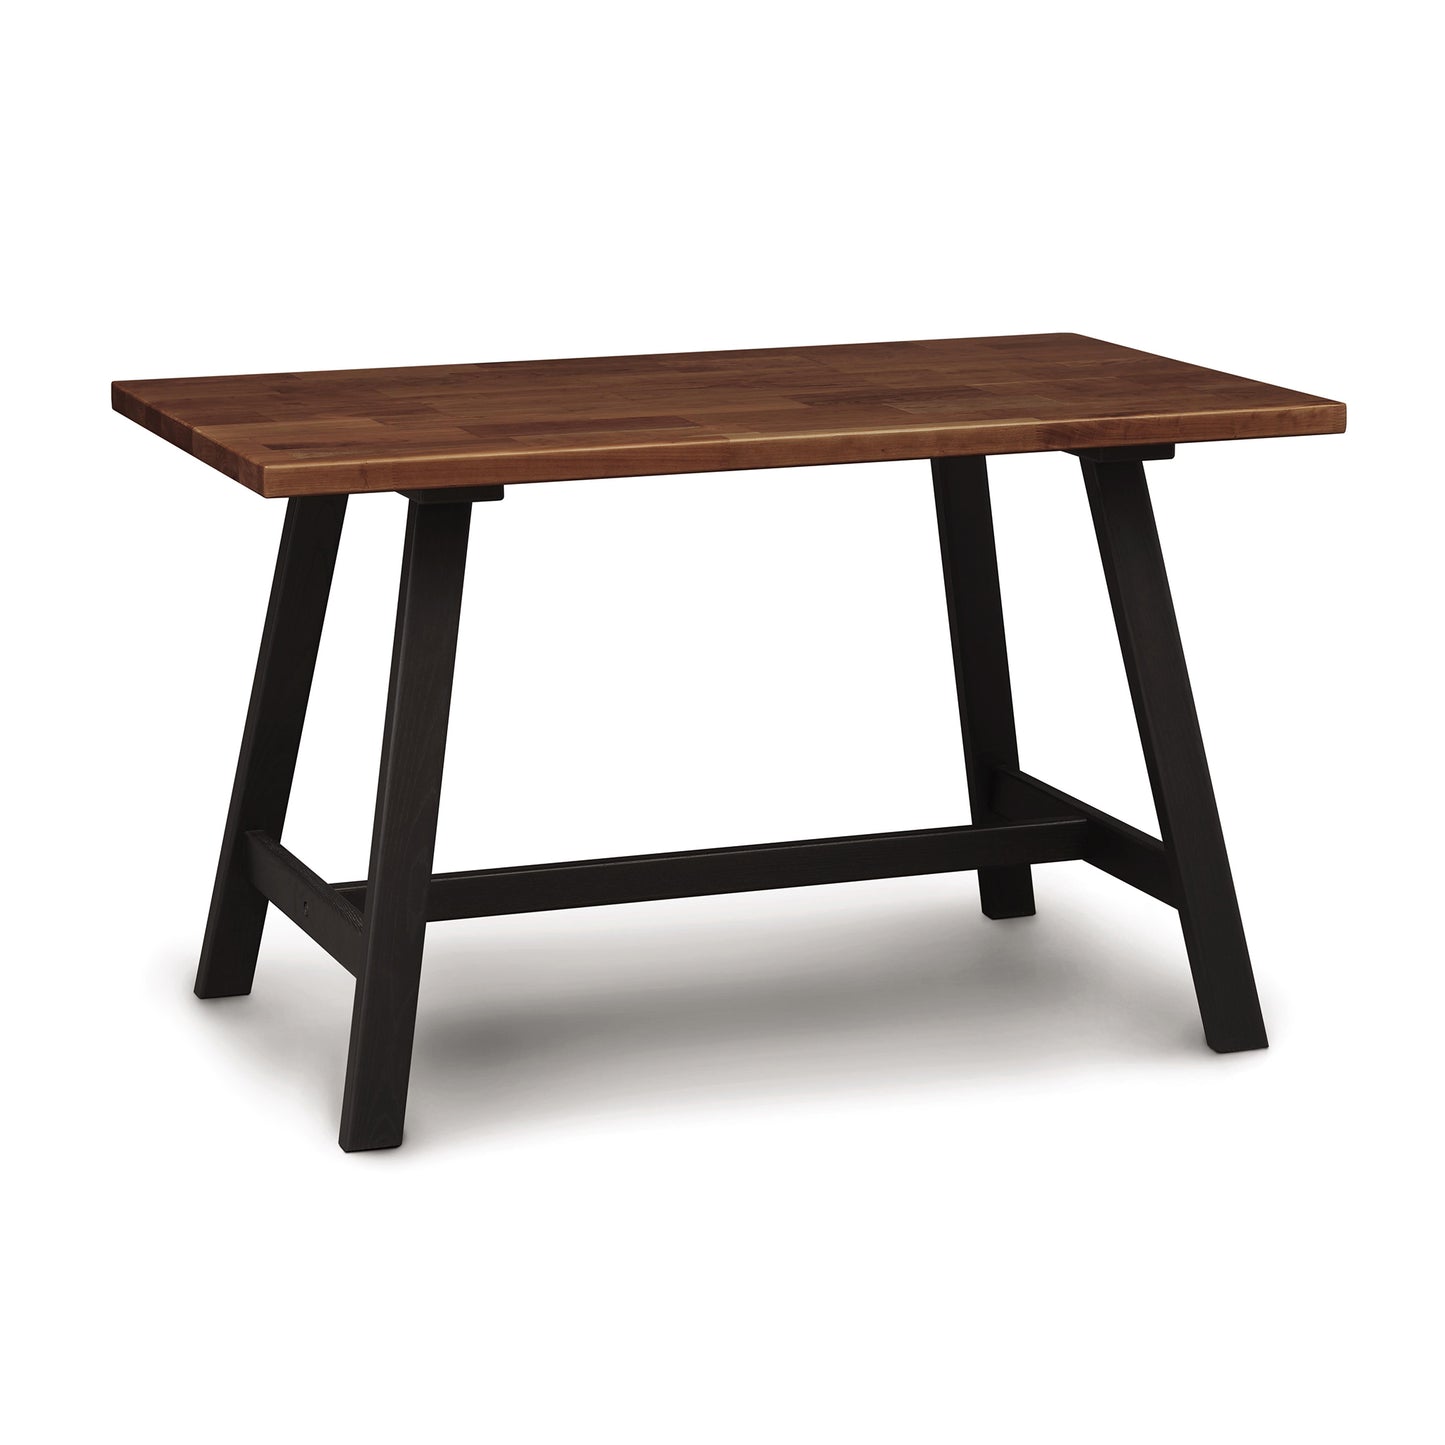 The Copeland Furniture Modern Farmhouse Counter Height Farm Table features a sleek design with black legs and a hardwood top.